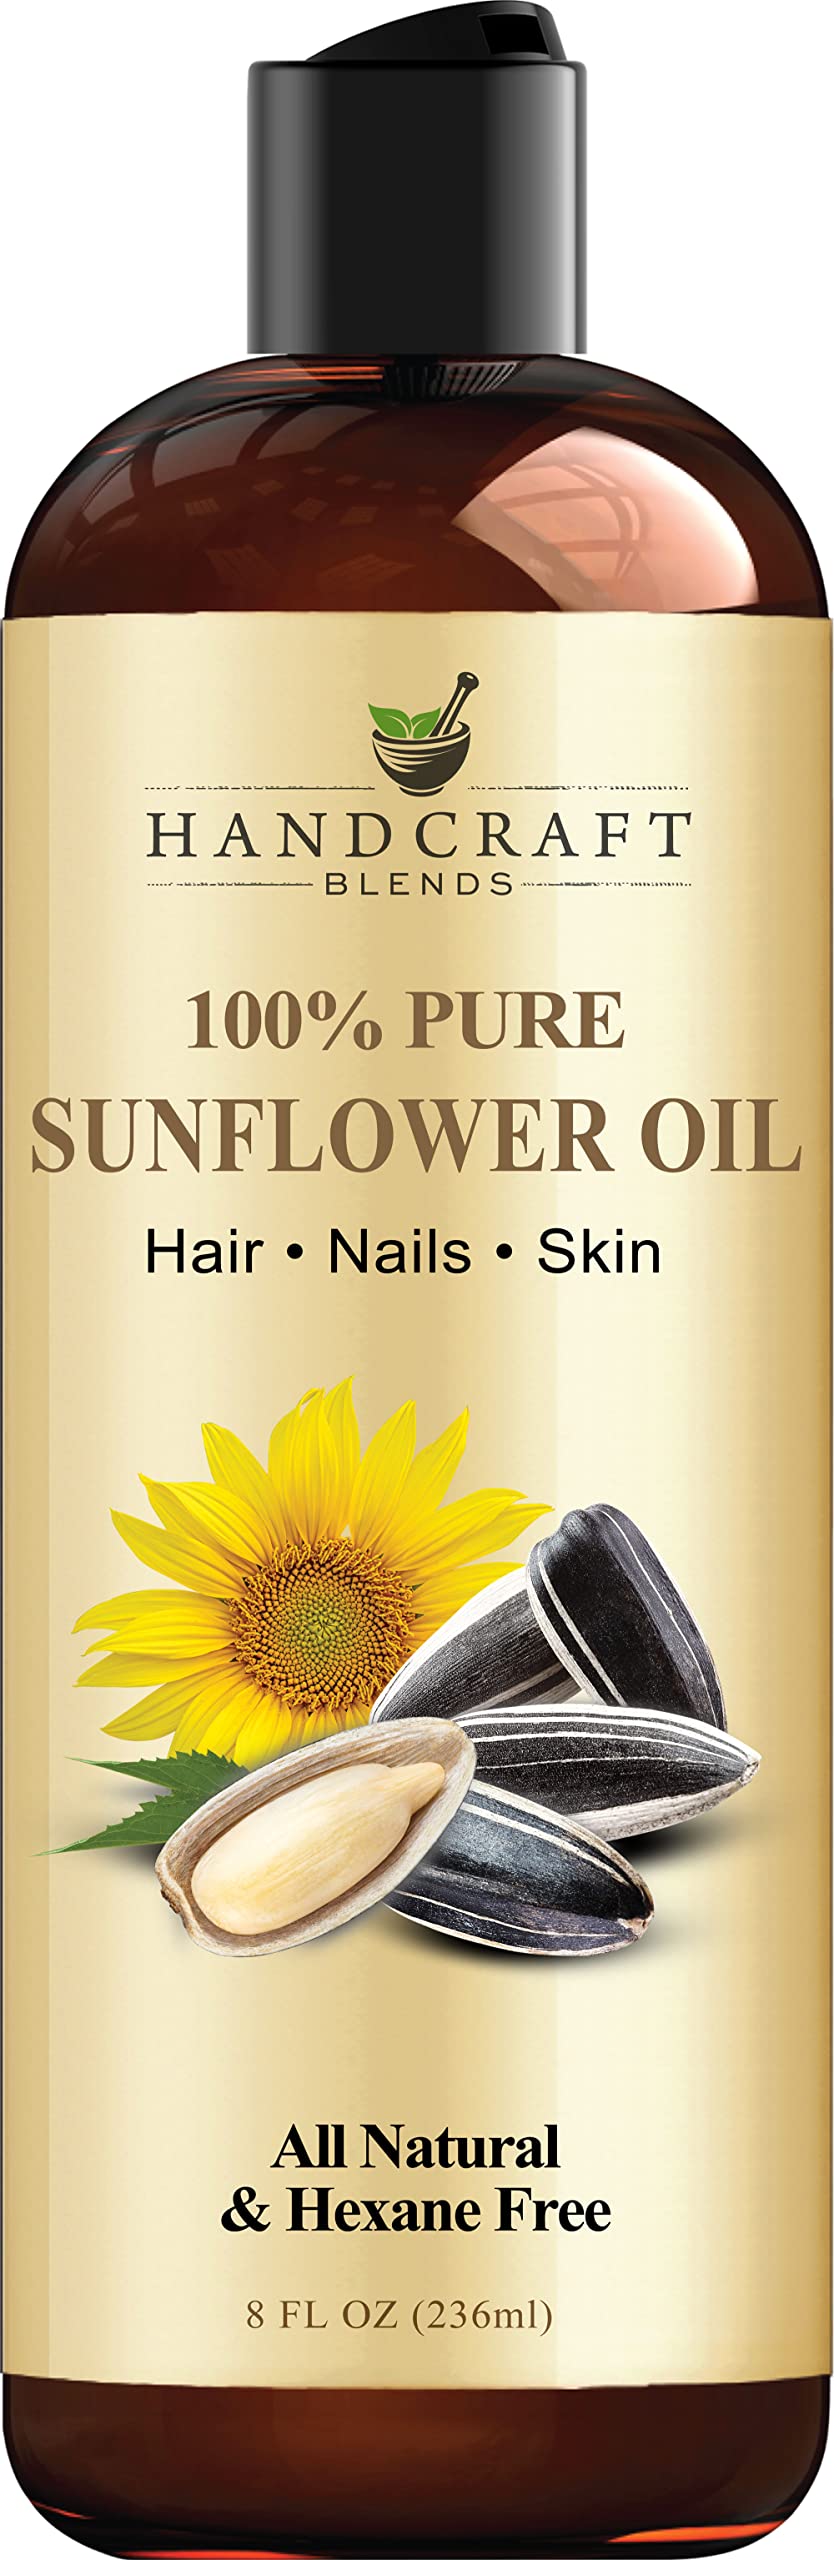 Handcraft Sunflower Oil – 100% Pure and Natural – Premium Quality Cold Pressed Carrier Oil for Essential Oils, Massage Oil, Moisturizing Skin and Hair – 8 fl. Oz